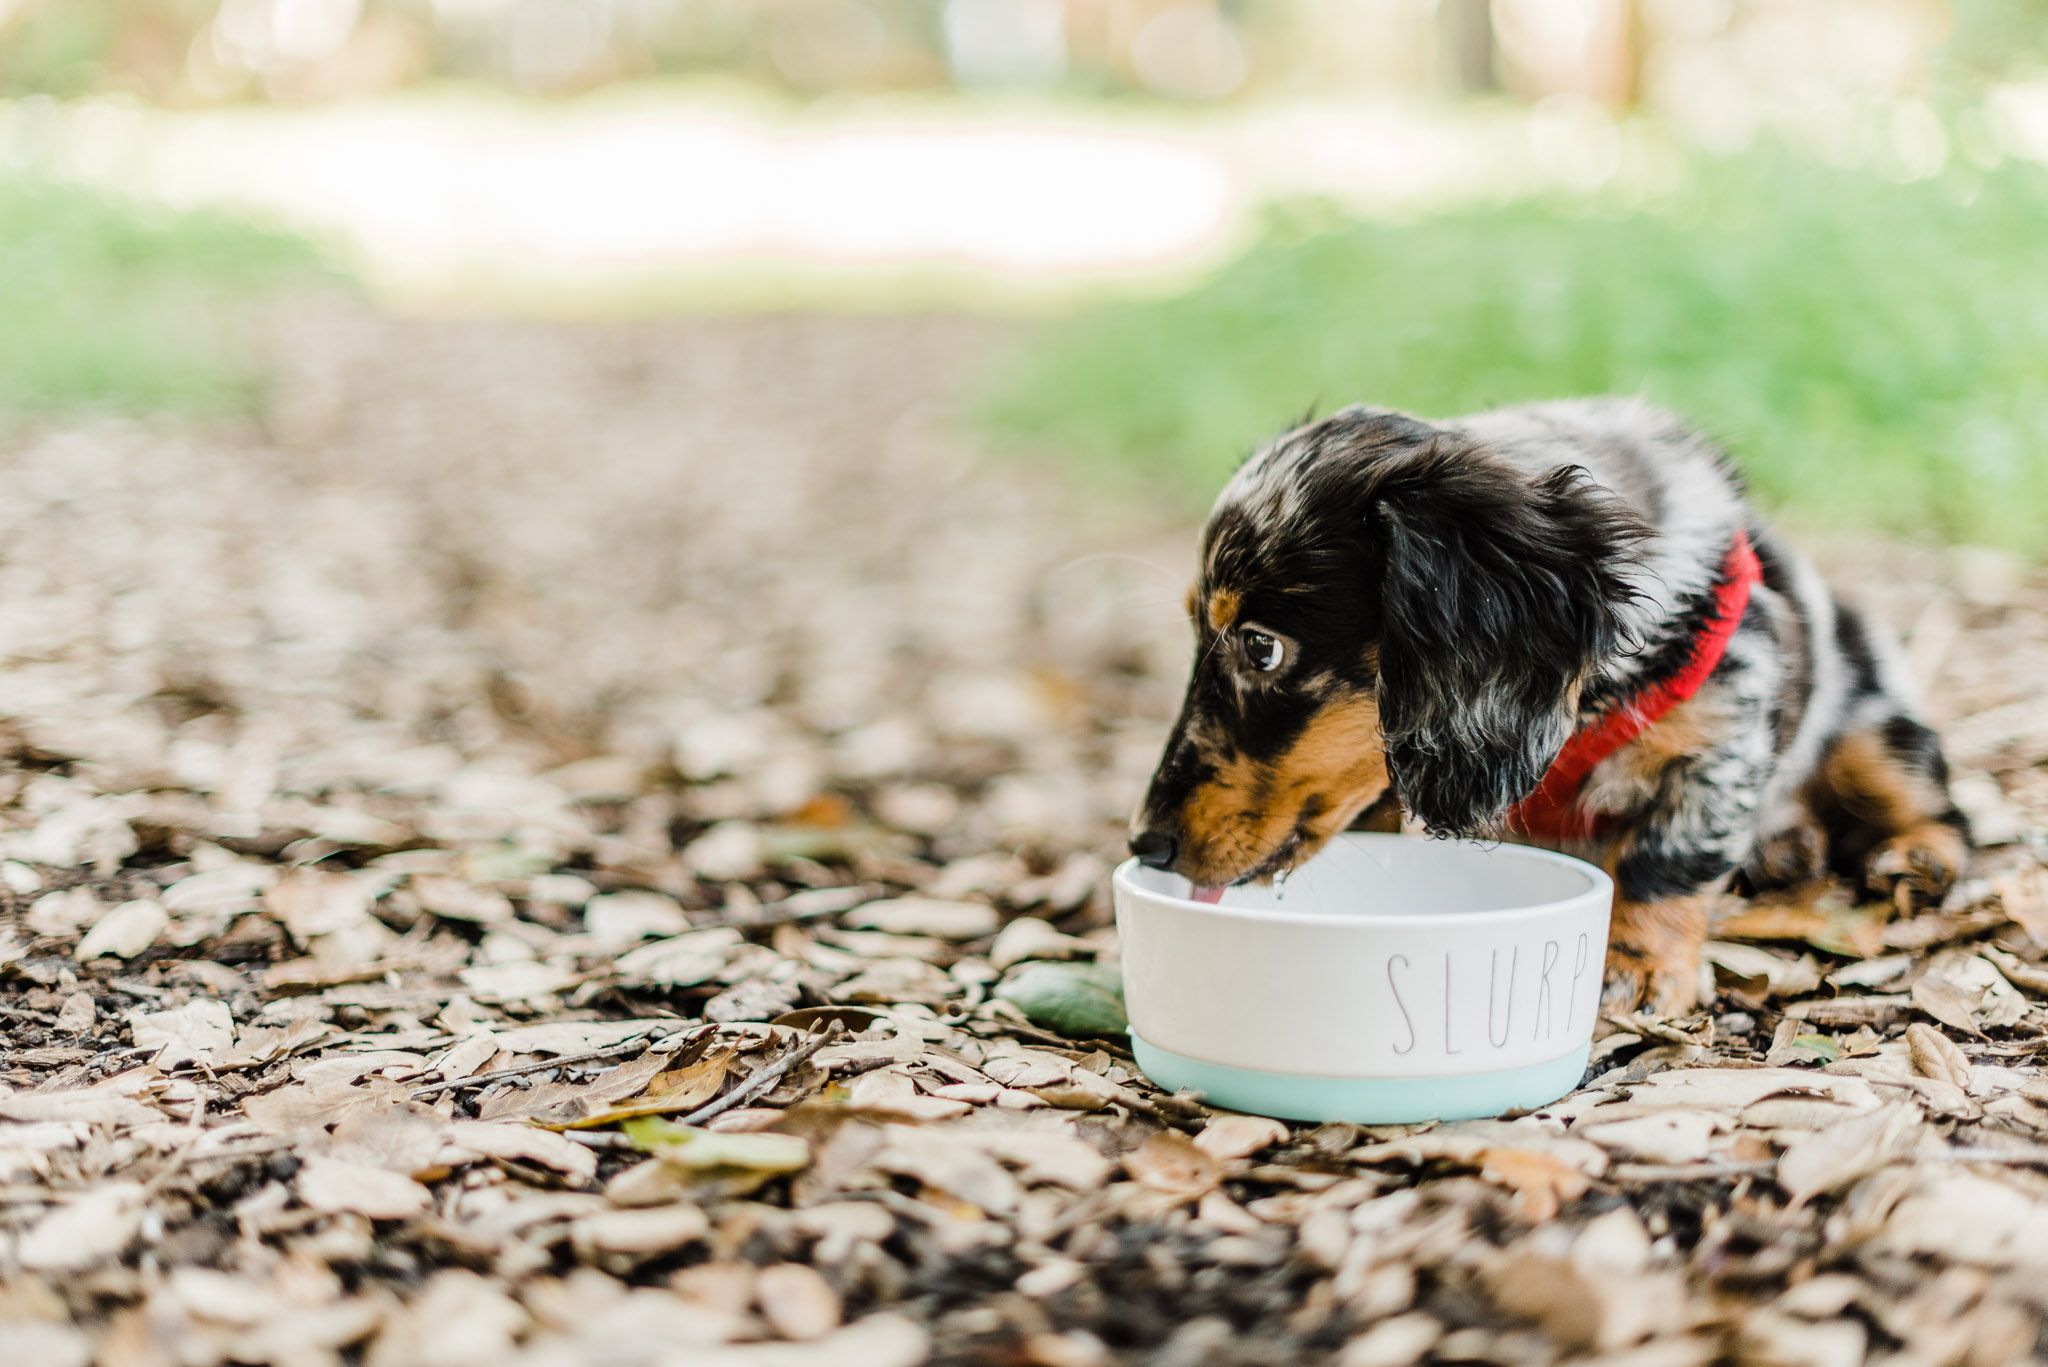 Black, long haired Dachshund puppy drinking out of a water bowl that says "slurp."